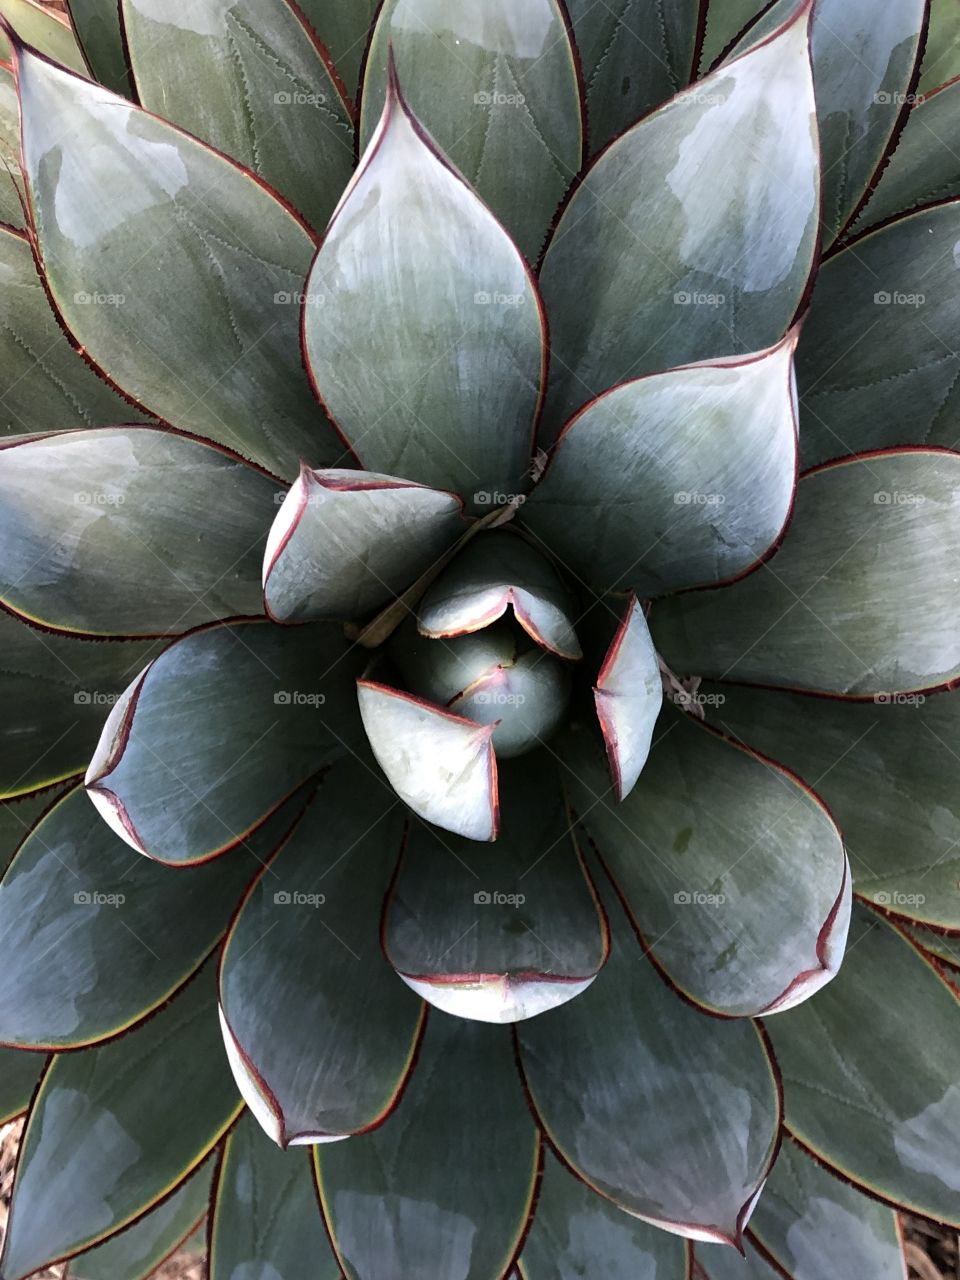 Mesmerizing succulent plant with green gray white pink pointy leaves. Bird’s eye view 